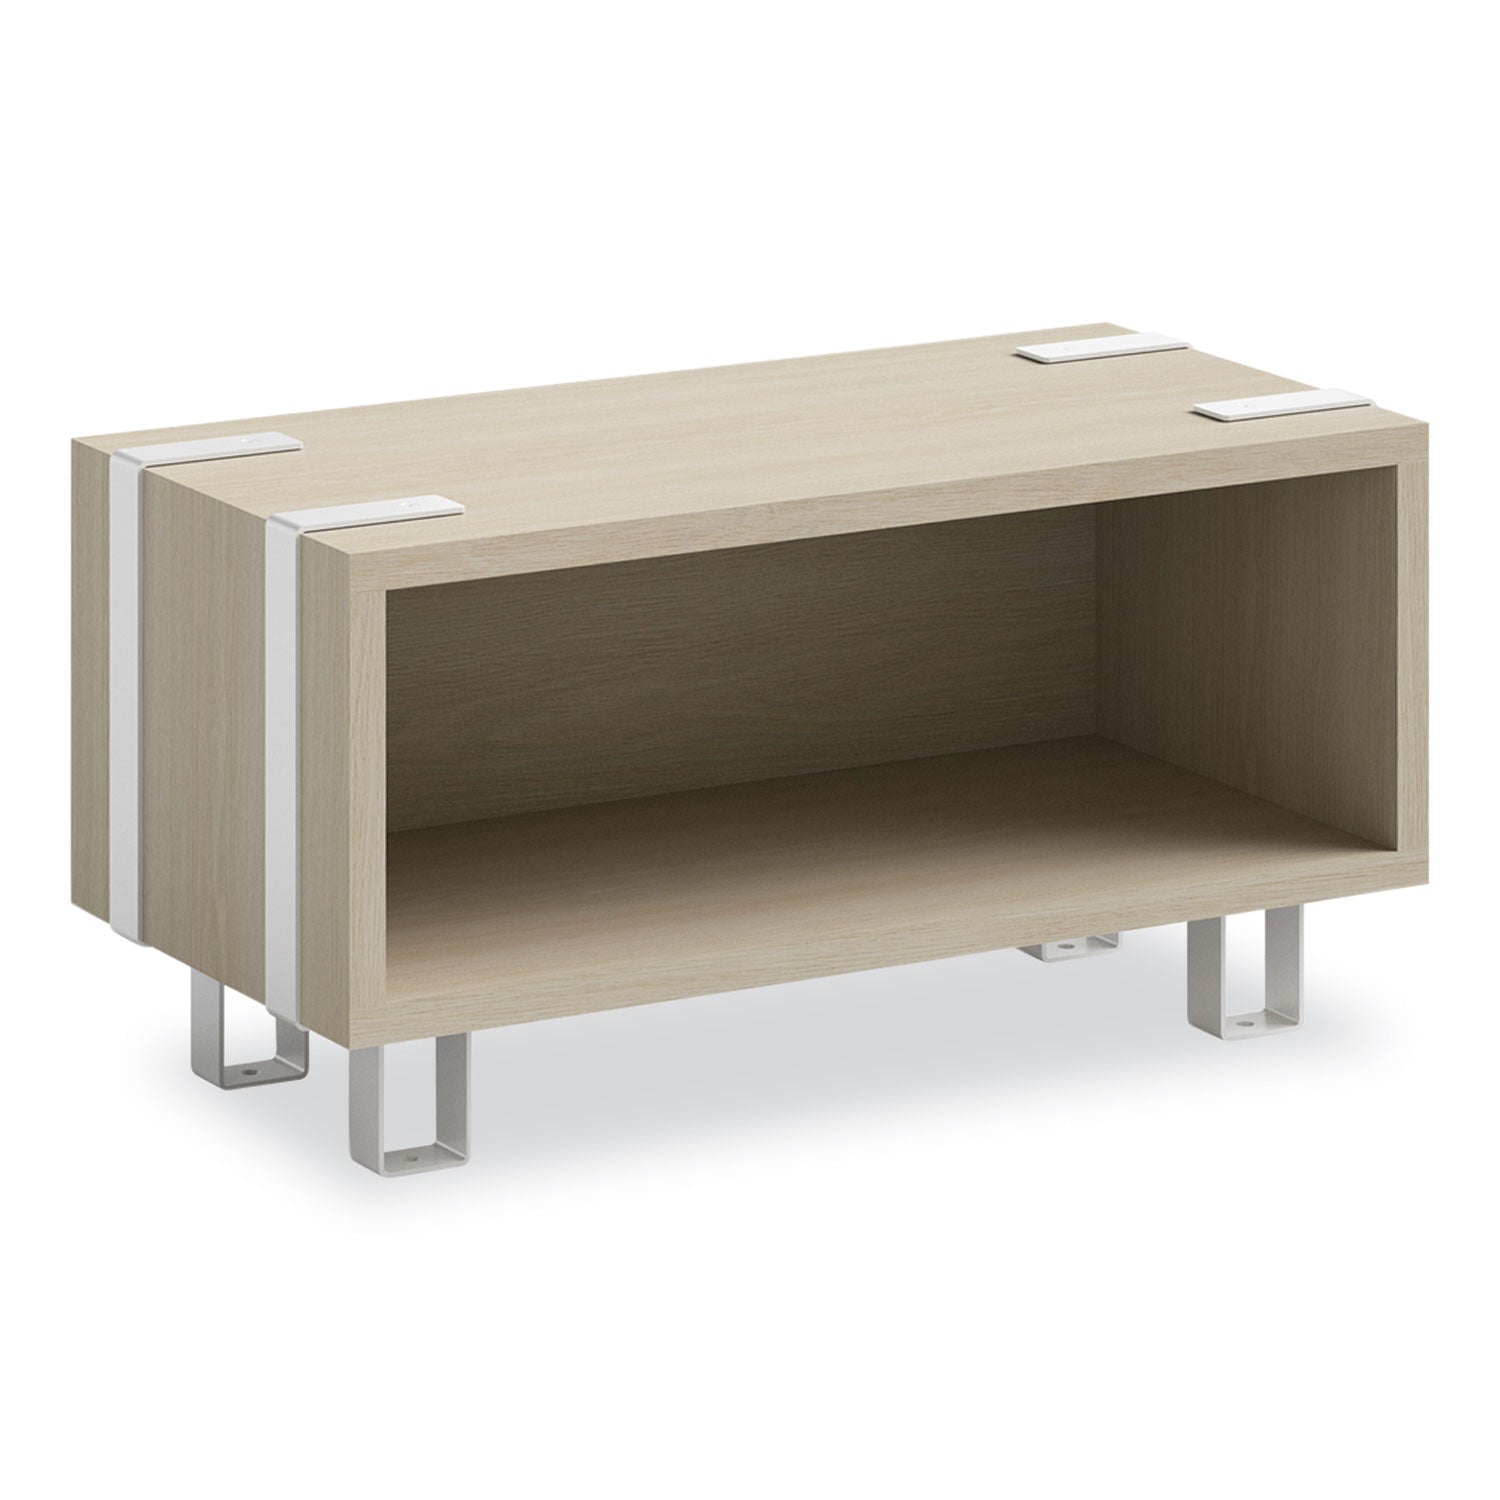 ready-home-office-small-stackable-storage-1-shelf-24w-x-12d-x-1225h-beige-white-ships-in-1-3-business-days_saf5510whna - 1